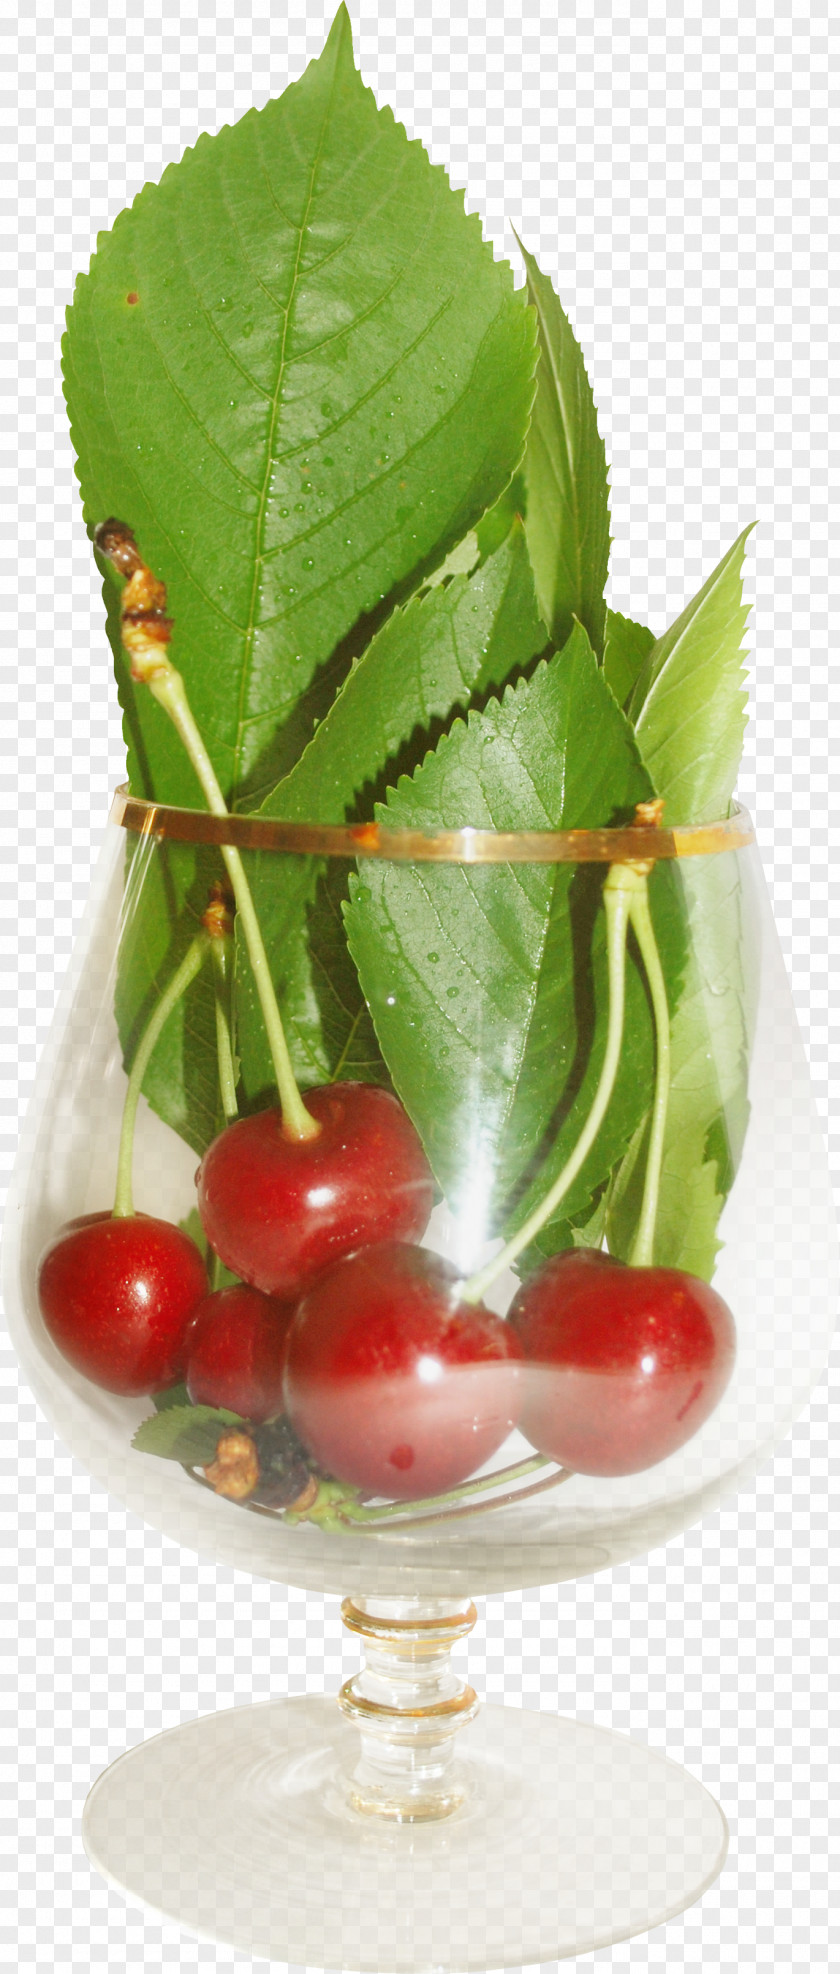 Cherry Sweet Fruit Auglis PNG